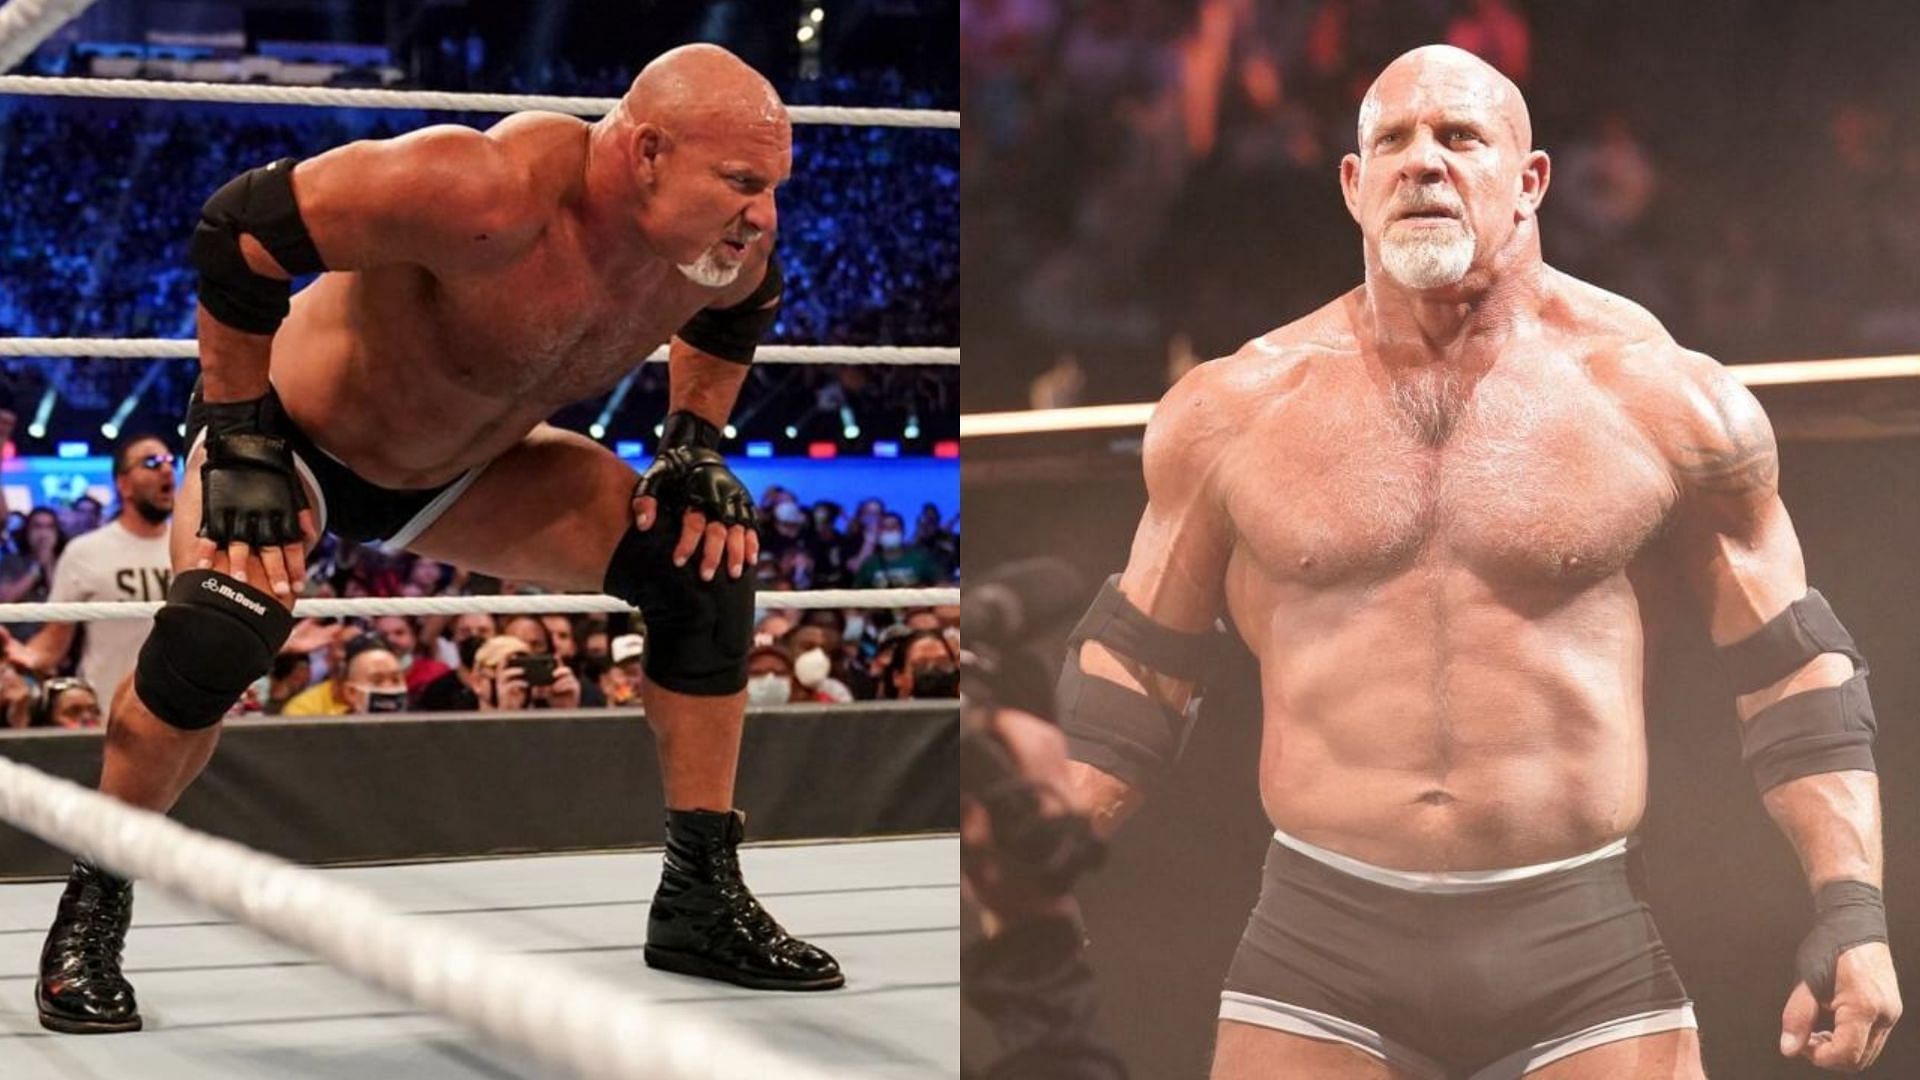 Goldberg has been called out by a former WWE star